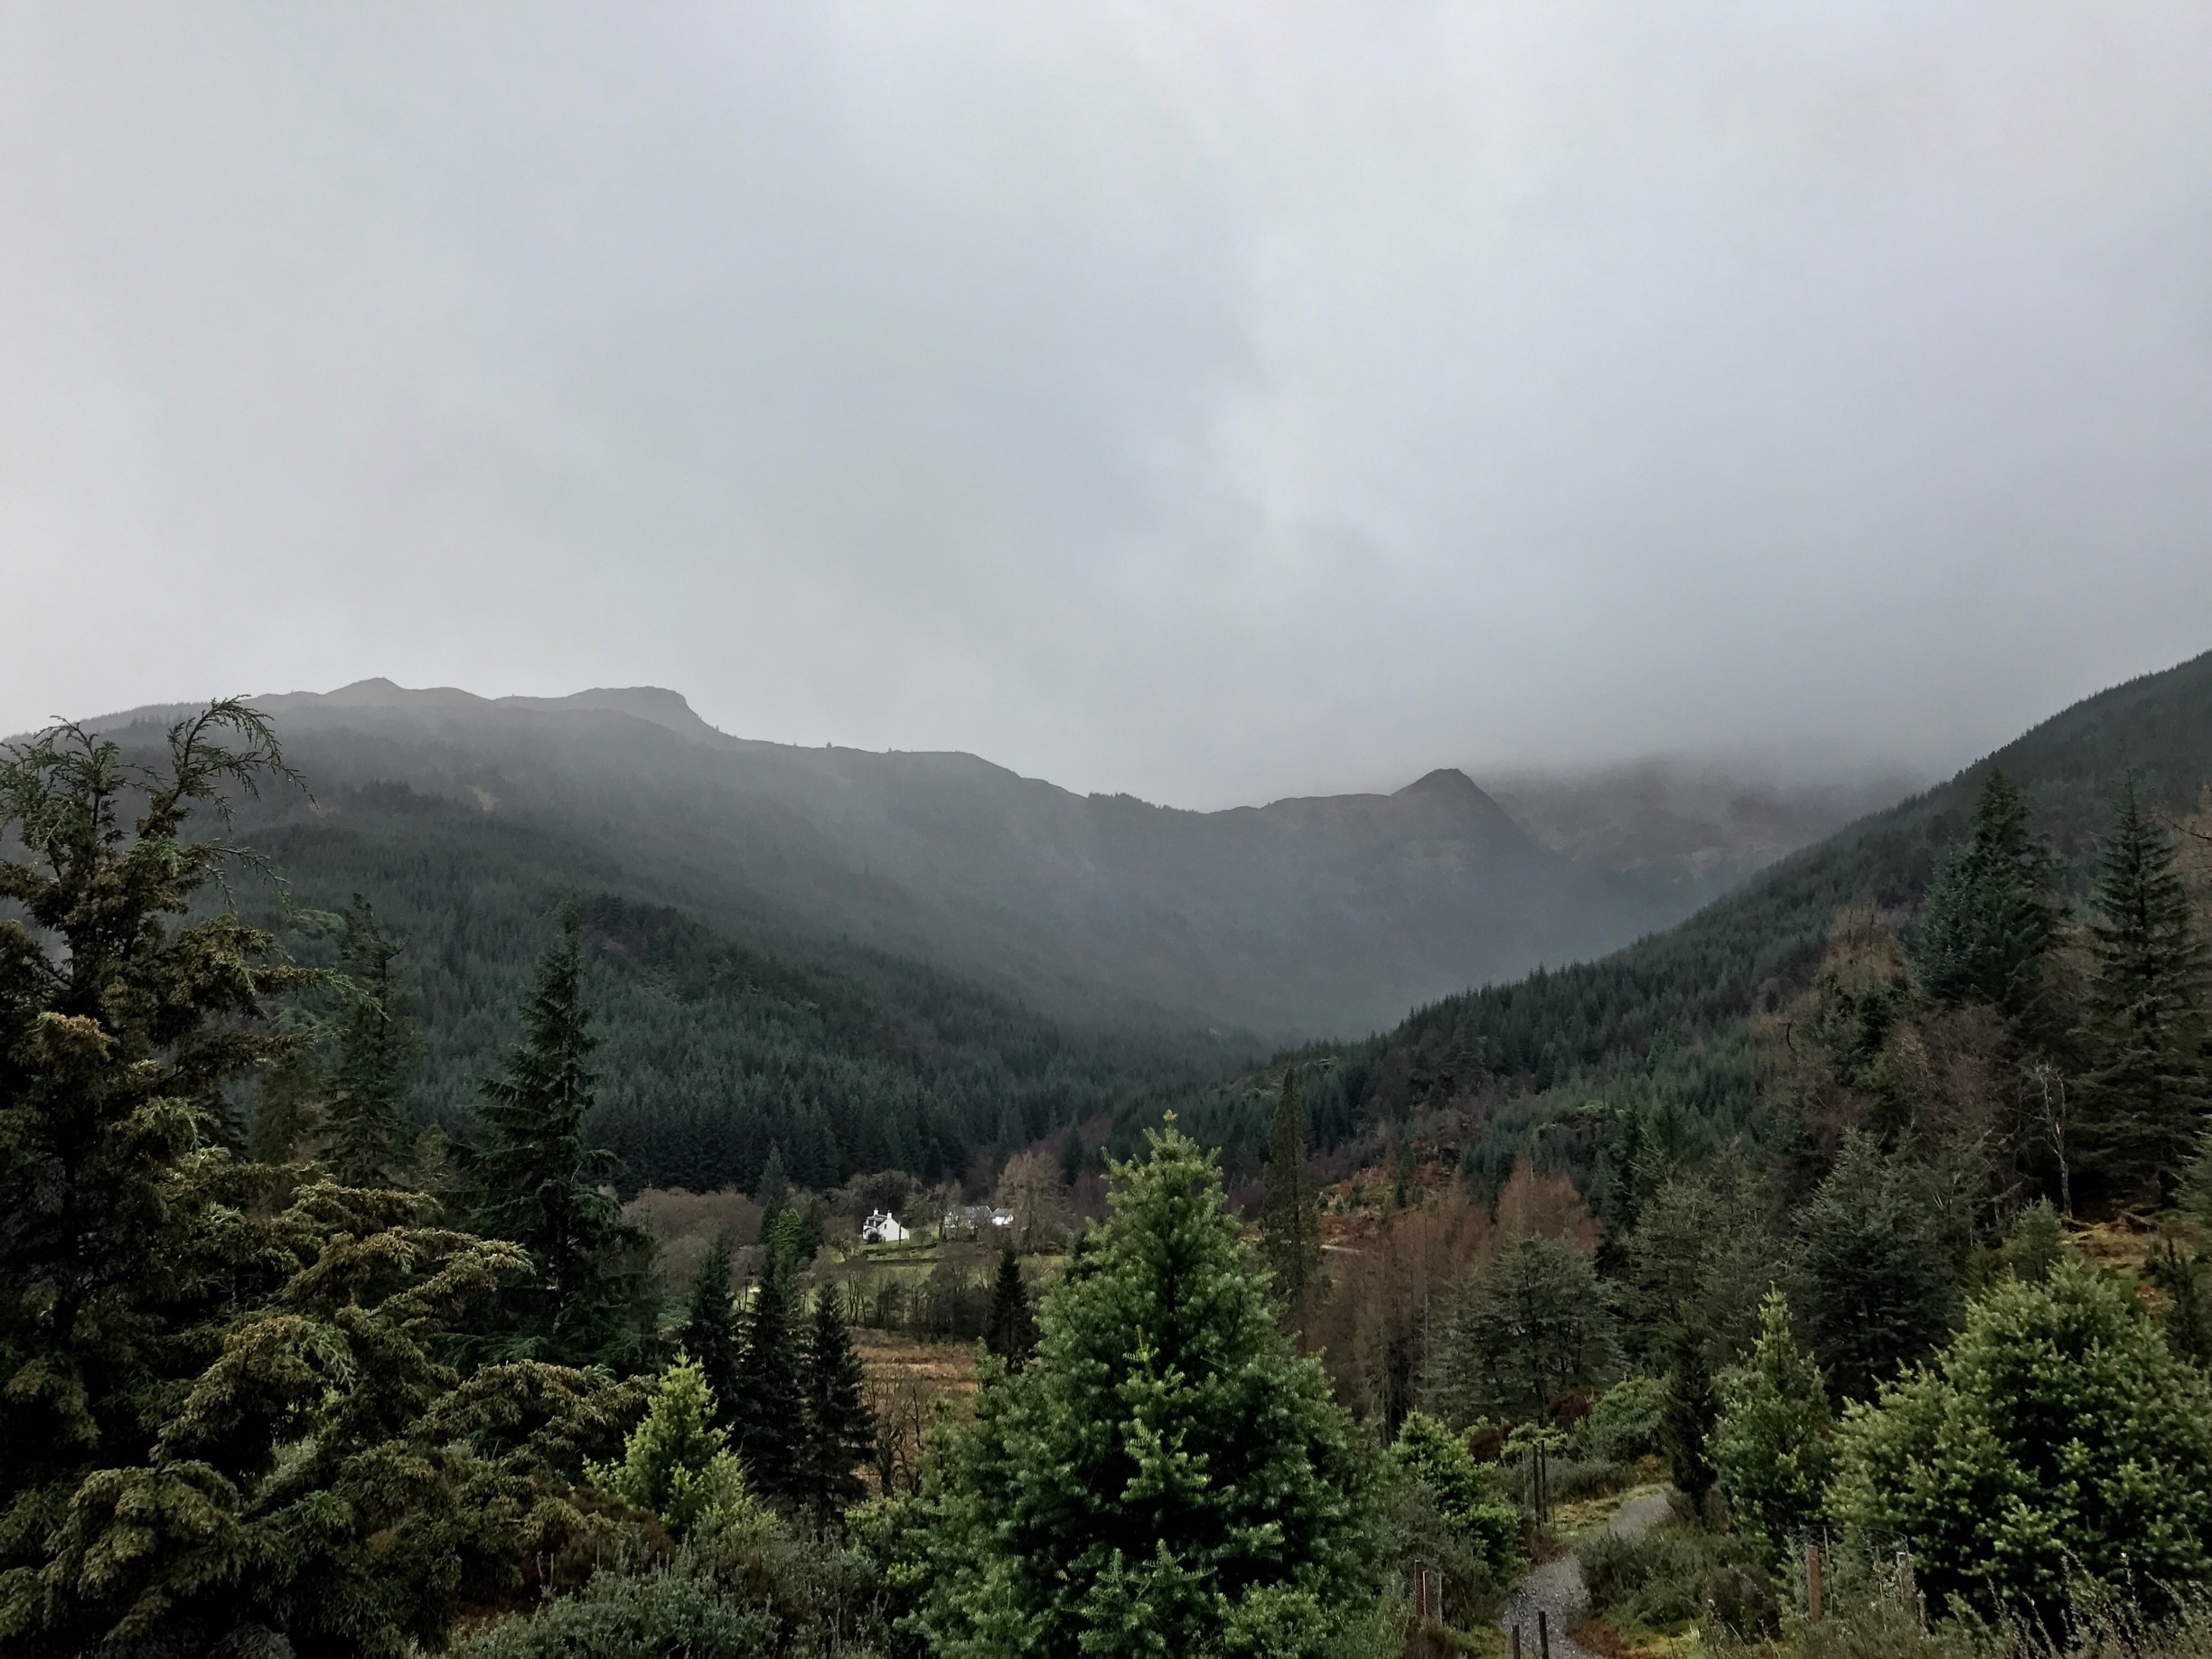 Benmore botanical gardens with the rain moving in. Really nice place for a day out. Lots to see and do and some nice viewpoints like this. 